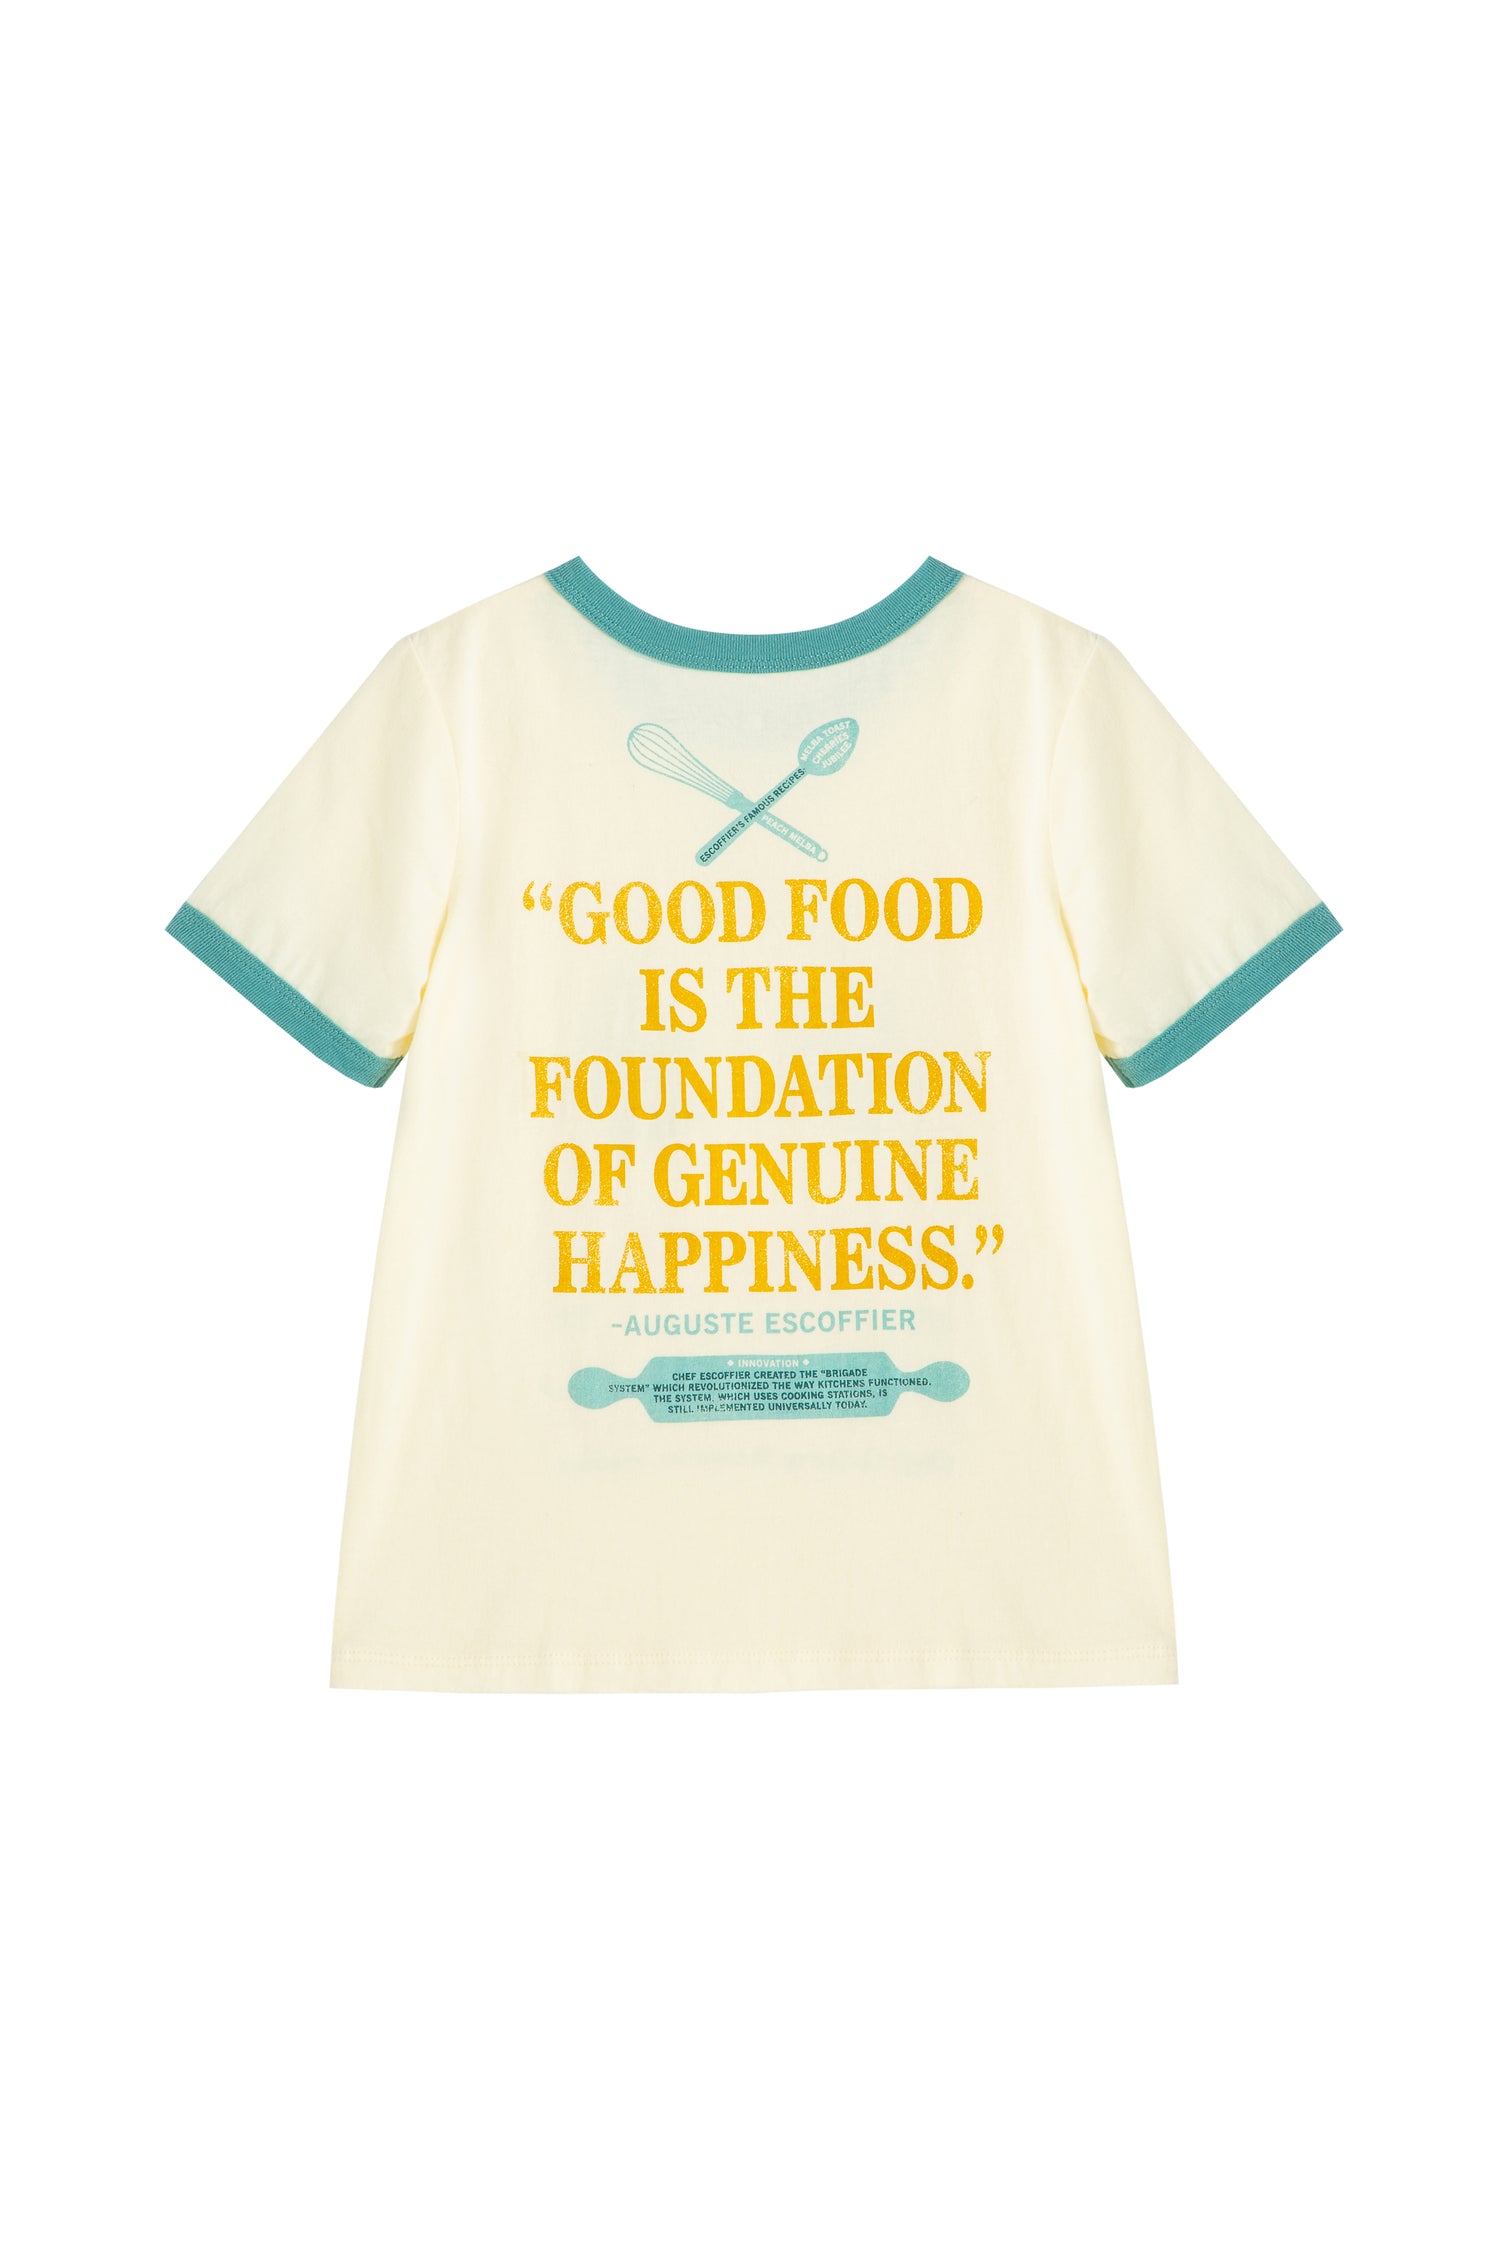 Back of white and baby blue t-shirt with quote "good food is the foundation of genuine happiness"